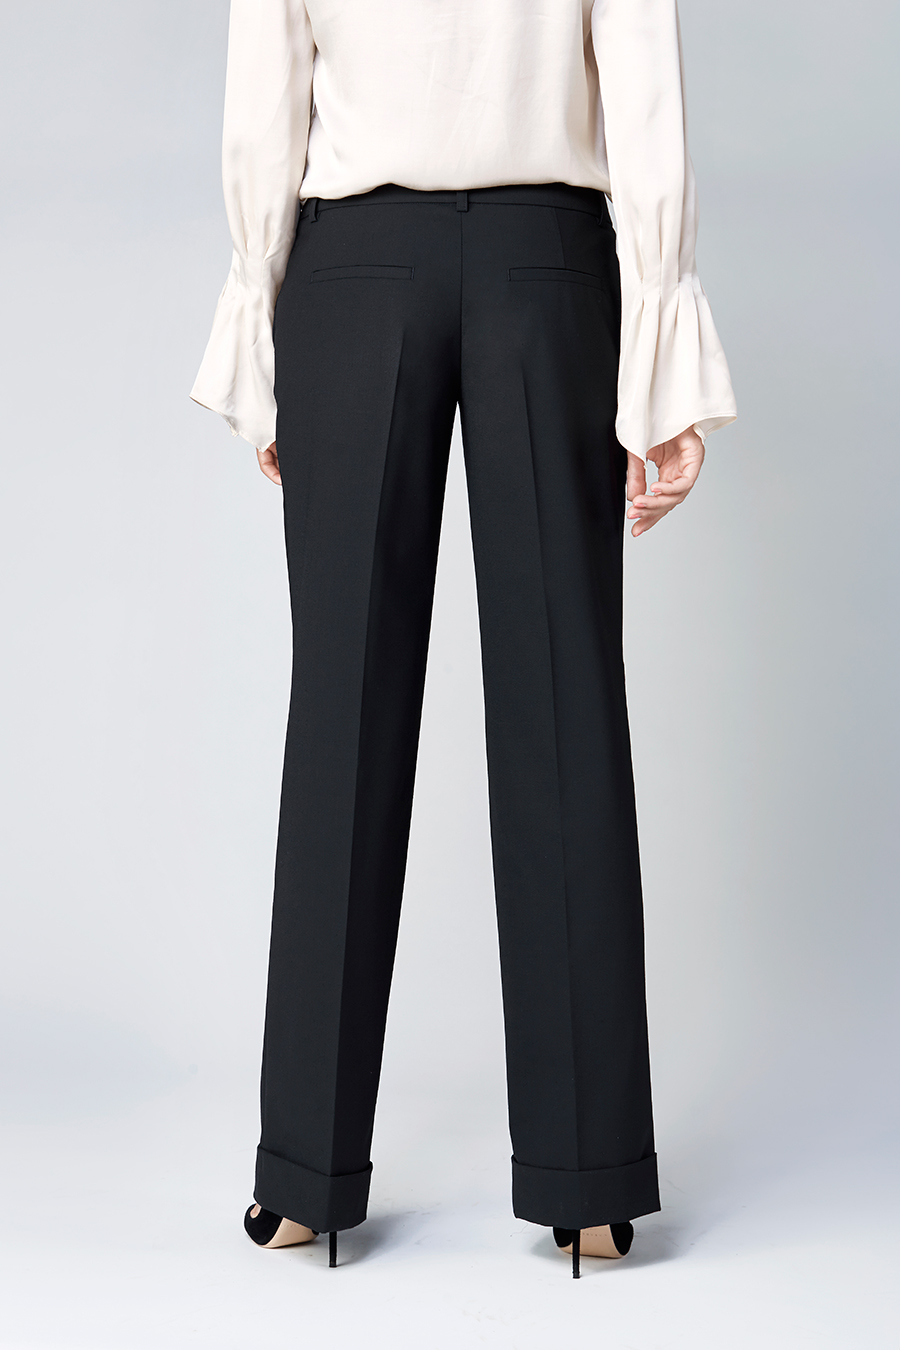 Black mid-rise wide leg pants with cuff | D2line